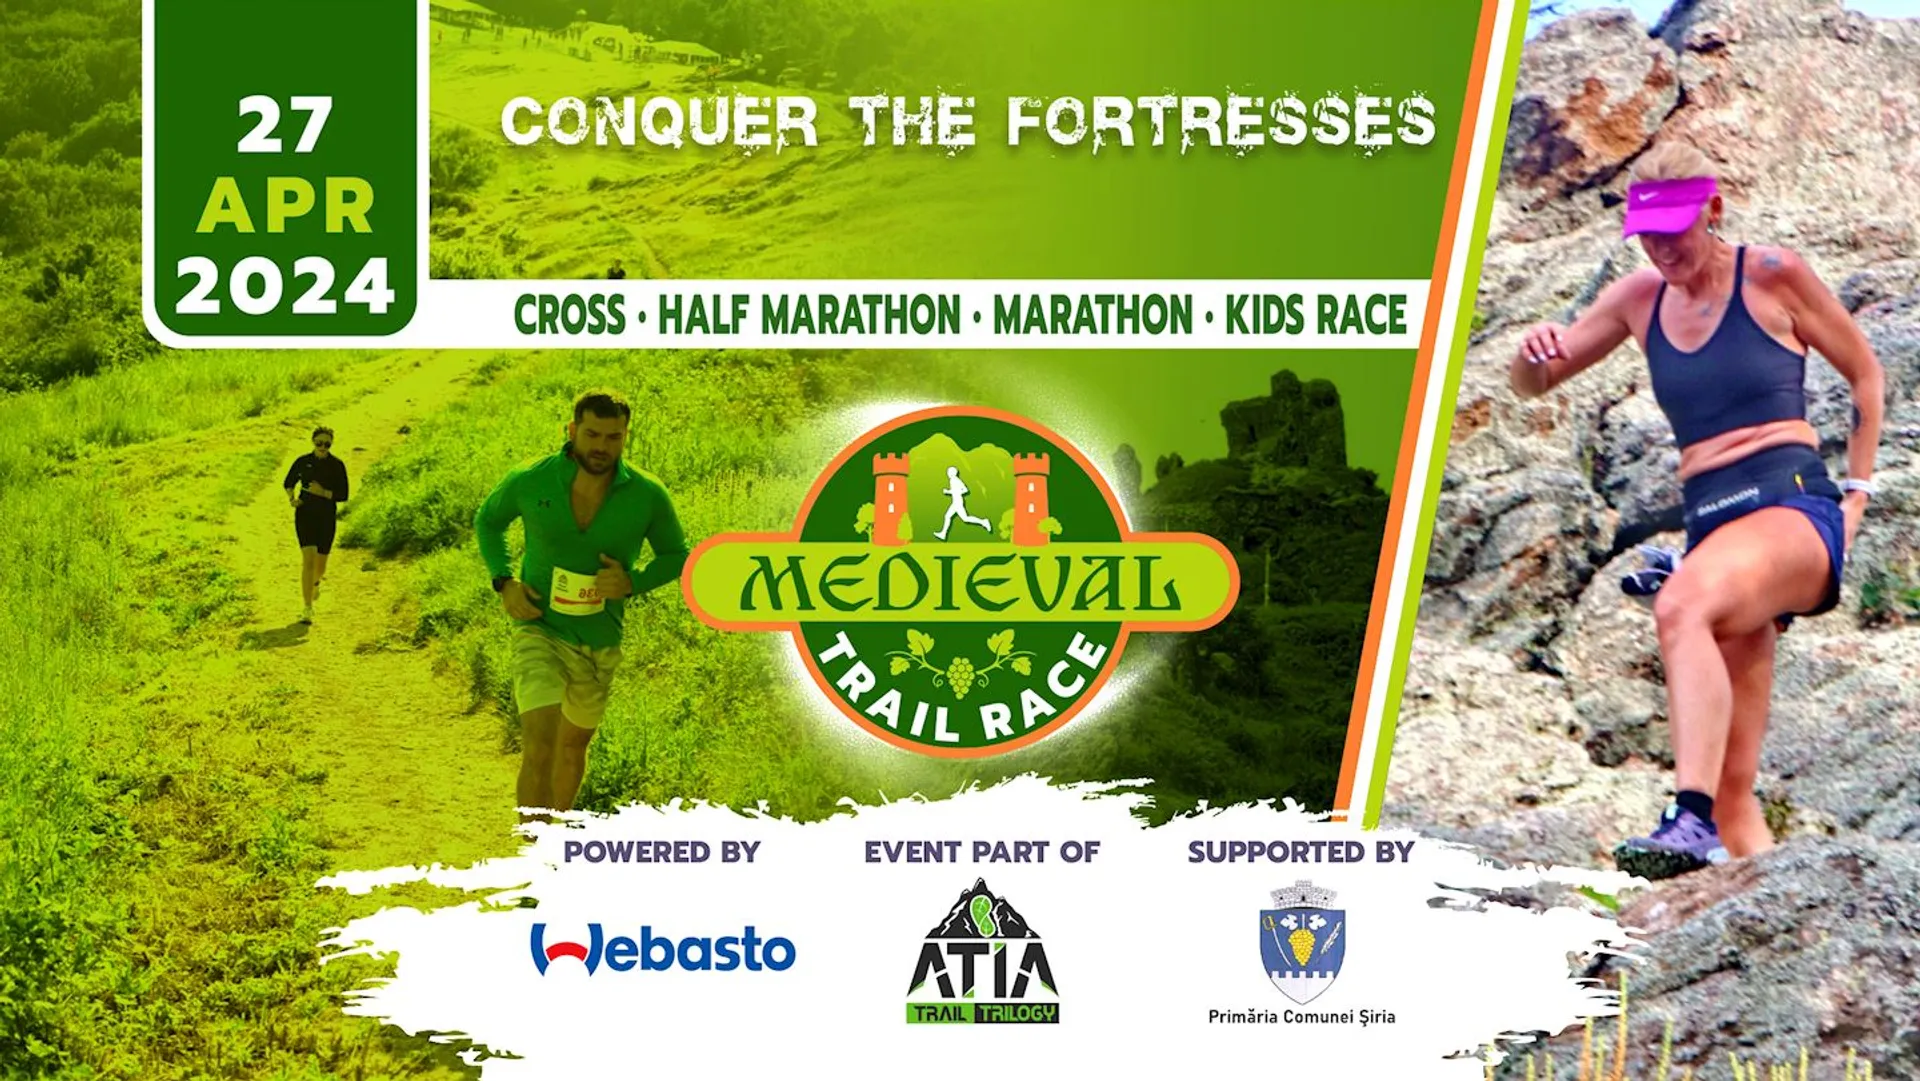 Image of Medieval Trail Race